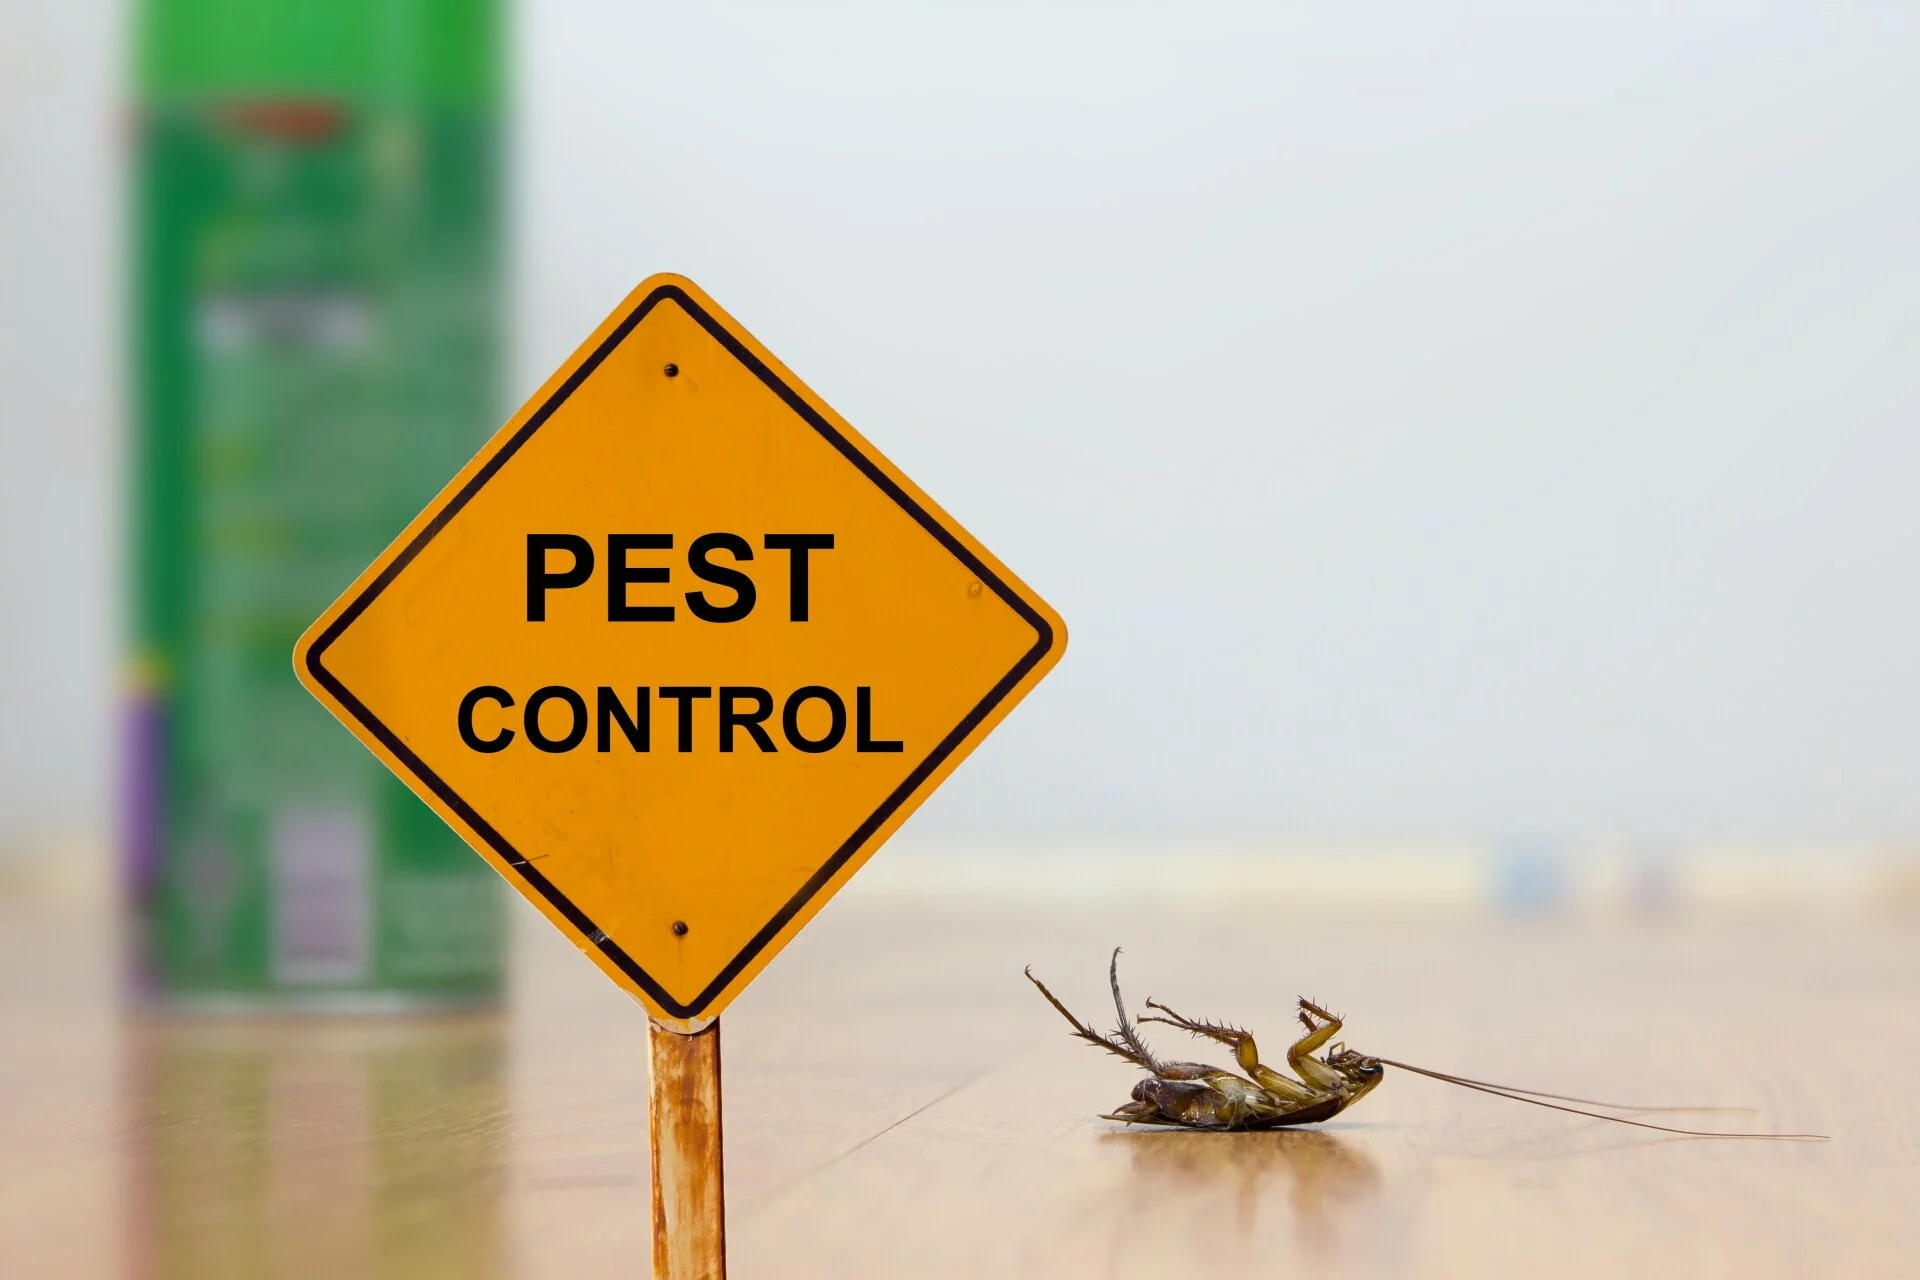 24 Hour Pest Control, Pest Control in Clapton, E5. Call Now 020 8166 9746